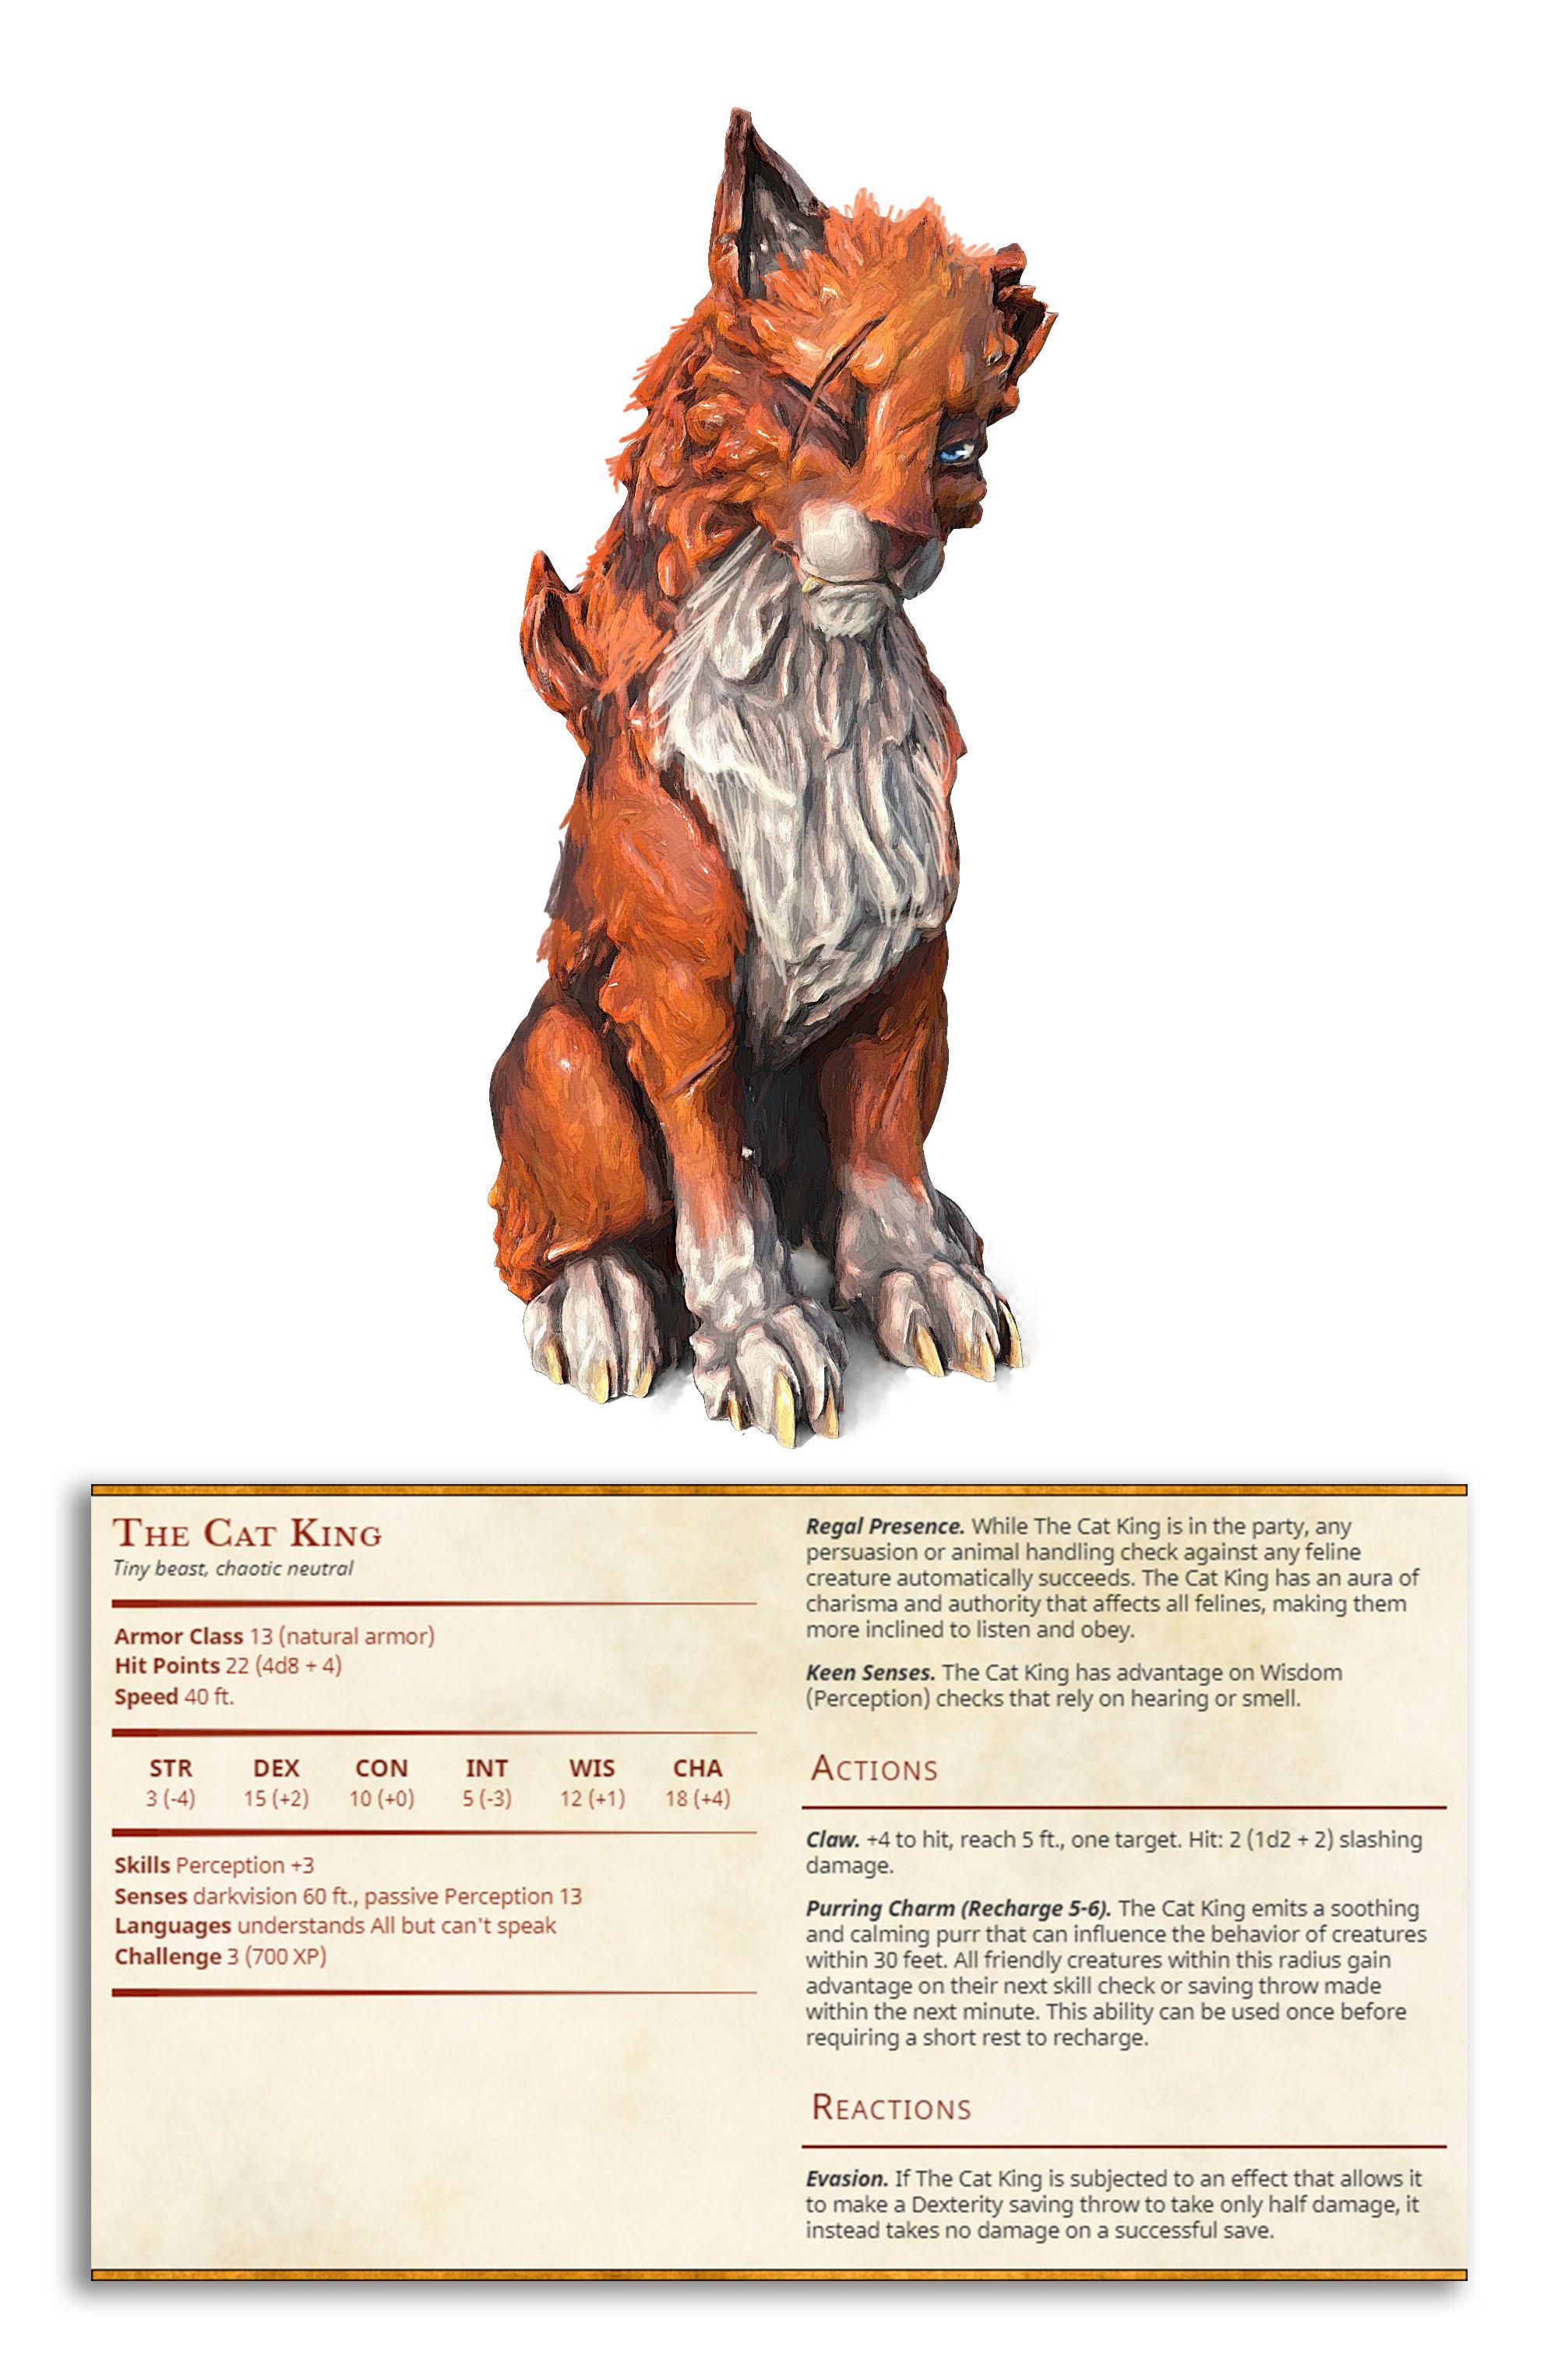 Cat King - NPC Familar - PRESUPPORTED - Illustrated and Stats - 32mm scale  3d model